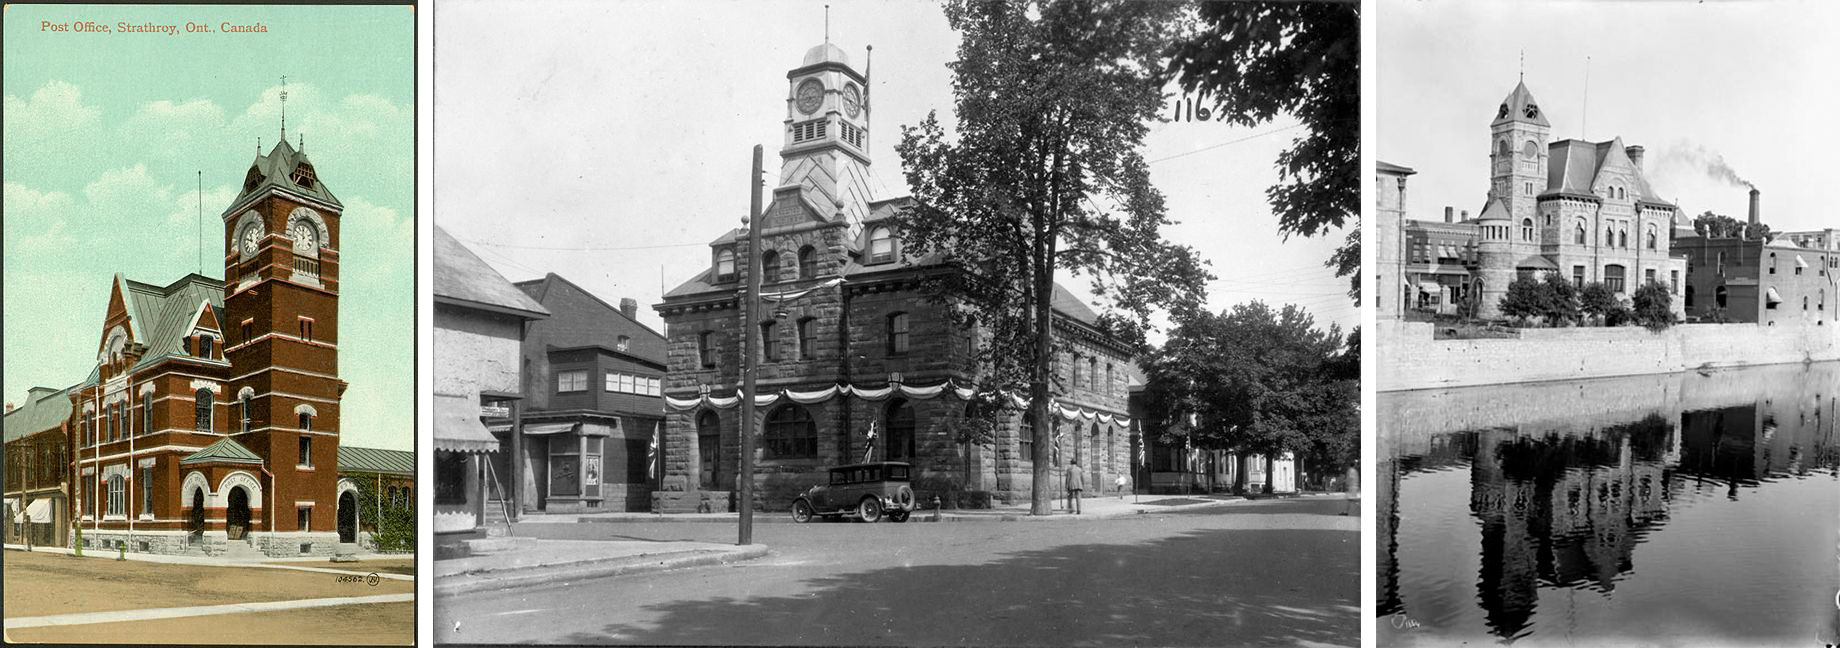 Side-by-side comparison of three images of similar post offices. Left: Old Strathroy Post Office. Middle: Smith Falls Post Office, a three-storey stone building with a central clock tower. Right: Galt Post Office, a three storey stone building with a clock tower on the left. It is located next to a canal.